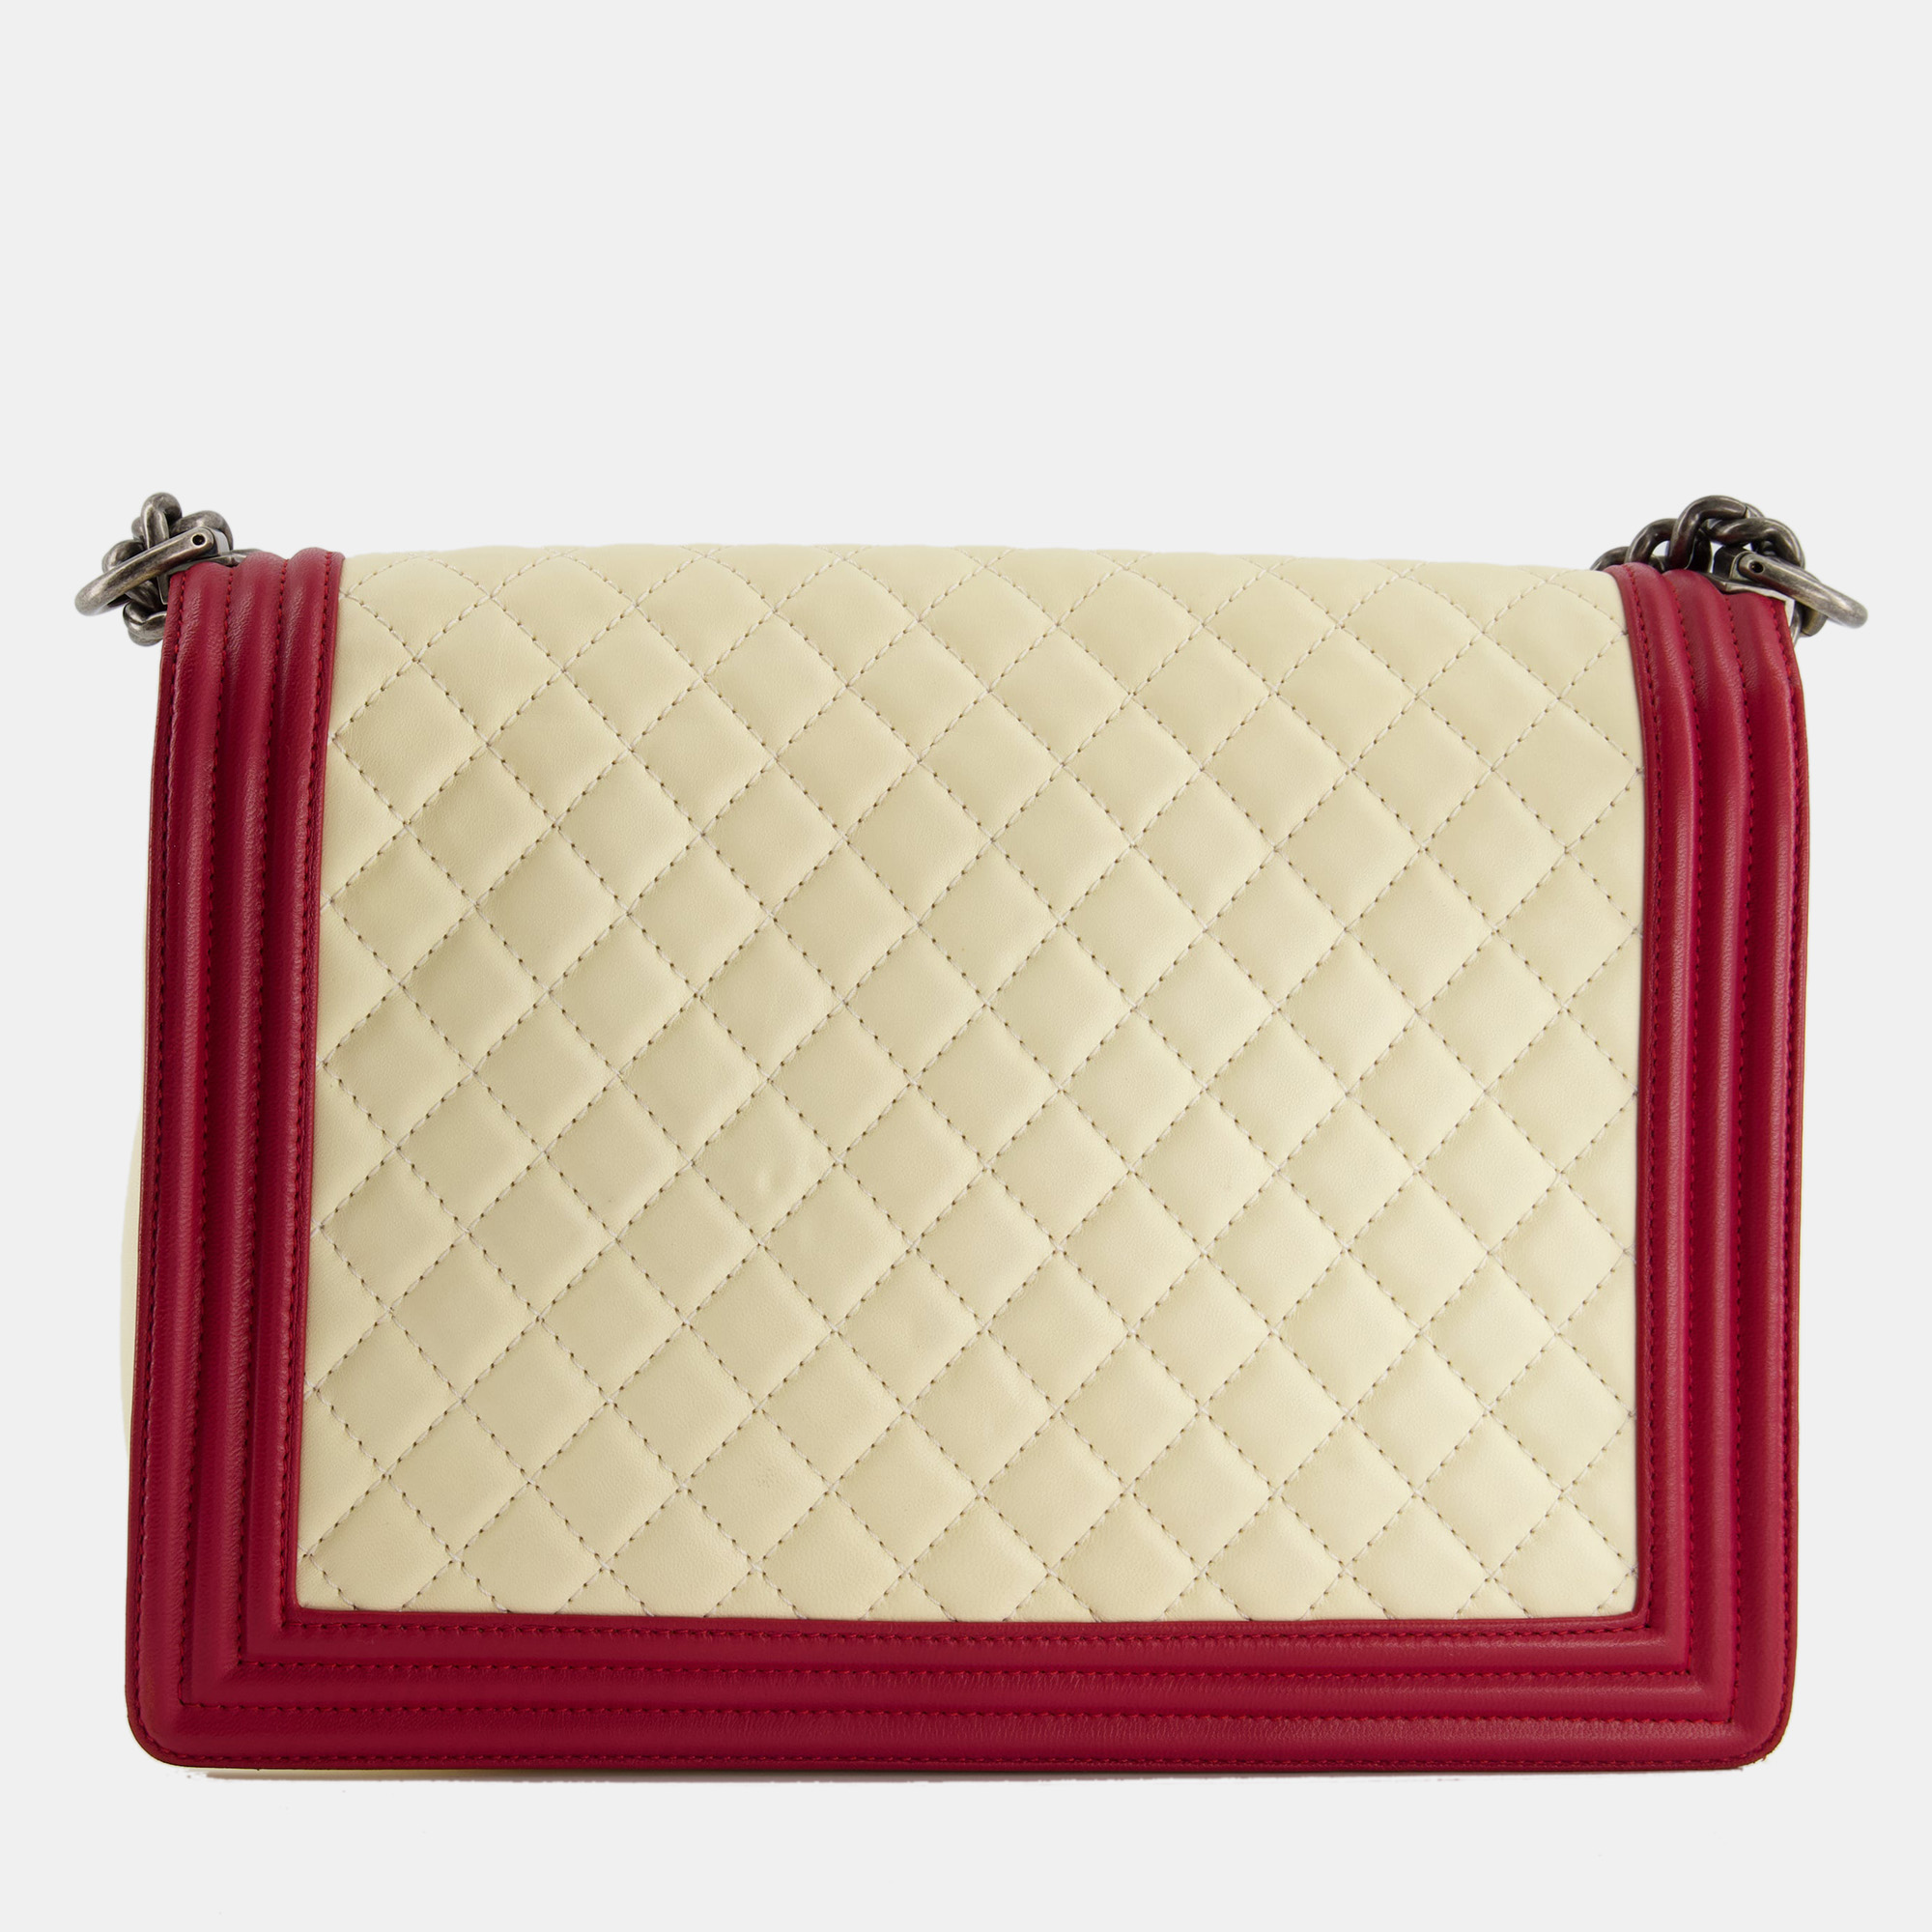 Chanel Cream And Red Large Boy Bag In Lambskin Leather With Ruthenium Hardware